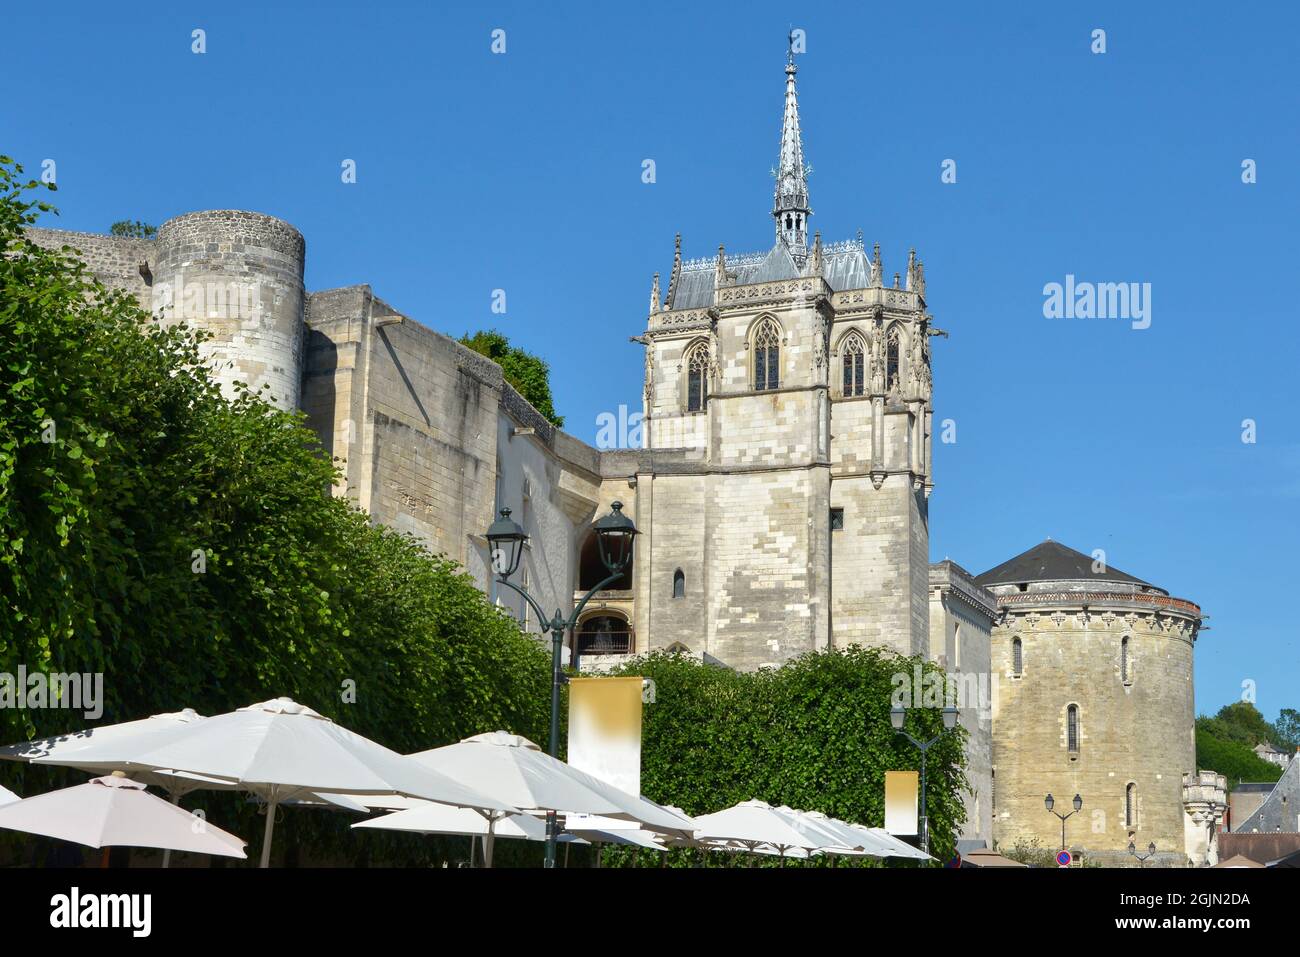 Castle and Saint Hubert chapel at the end of a tower at Amboise, a commune in the Indre-et-Loire department in central France Stock Photo